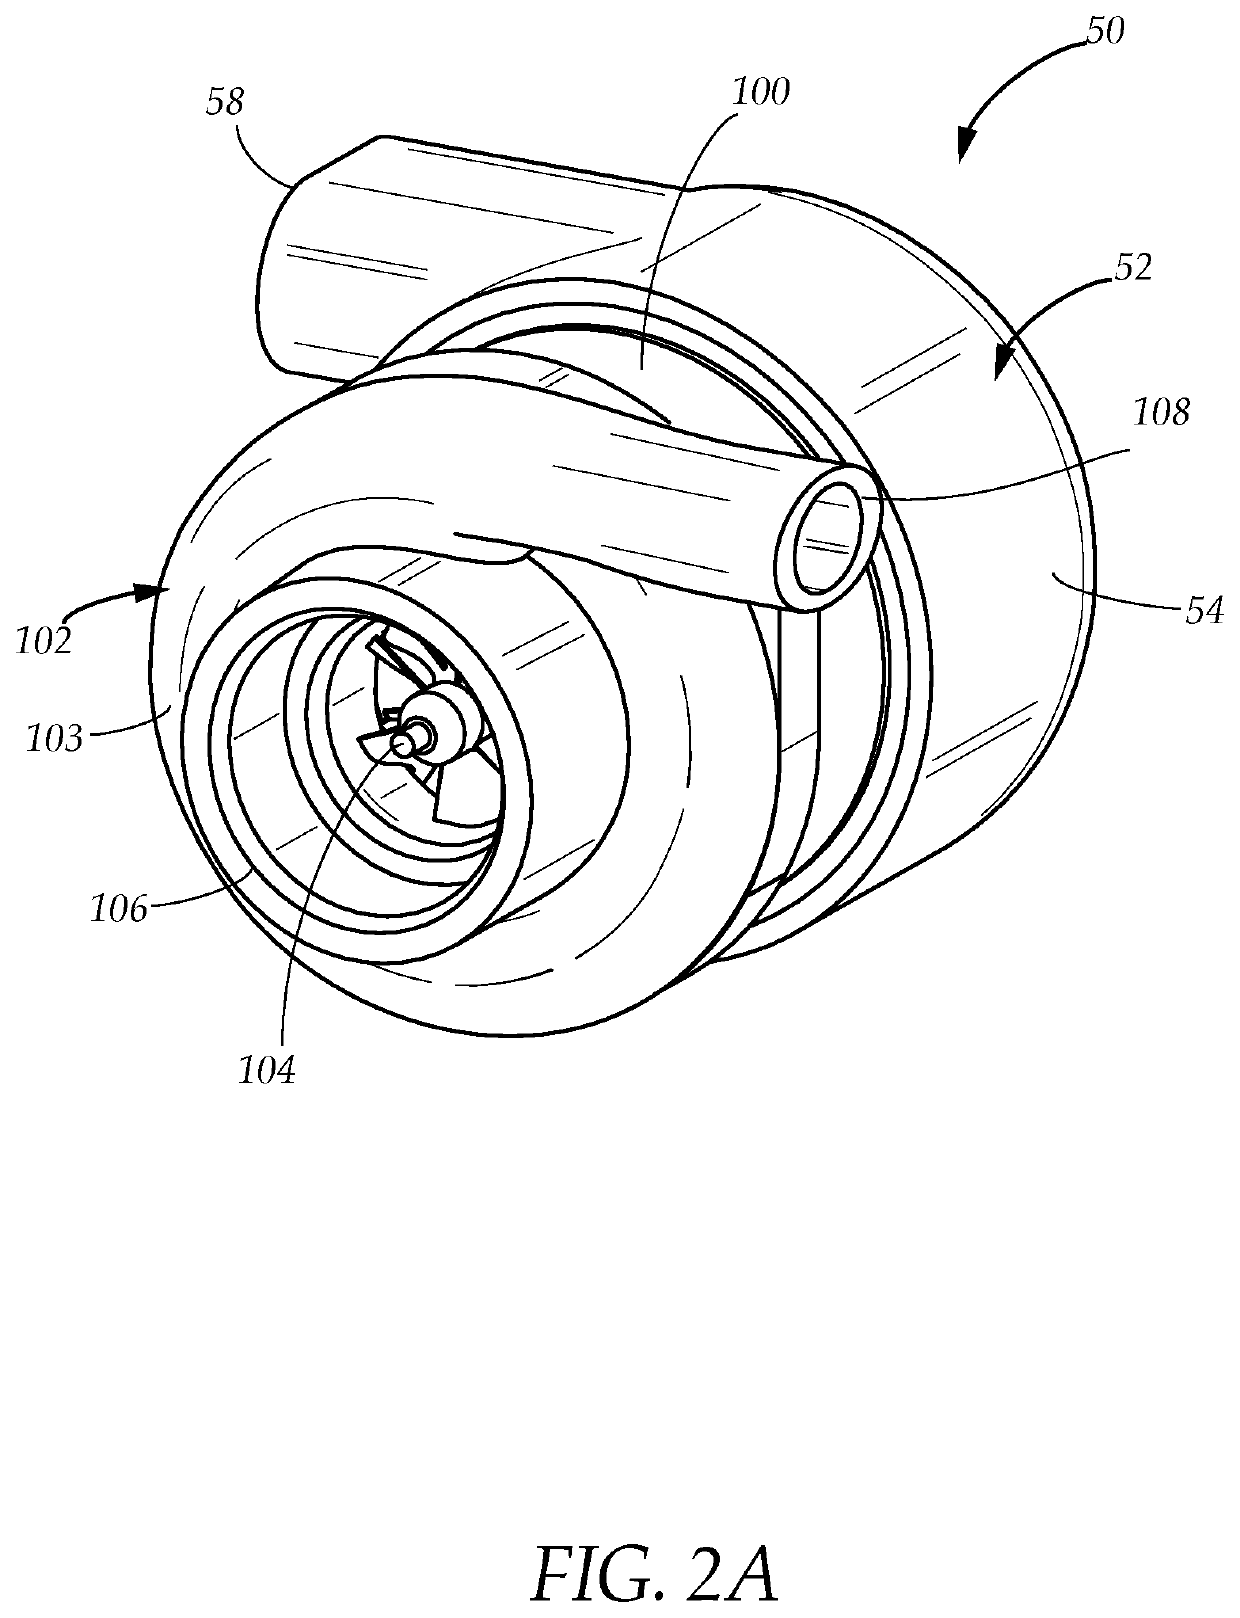 Turbocharger control valve for retaining back pressure and maintaining boost pressure